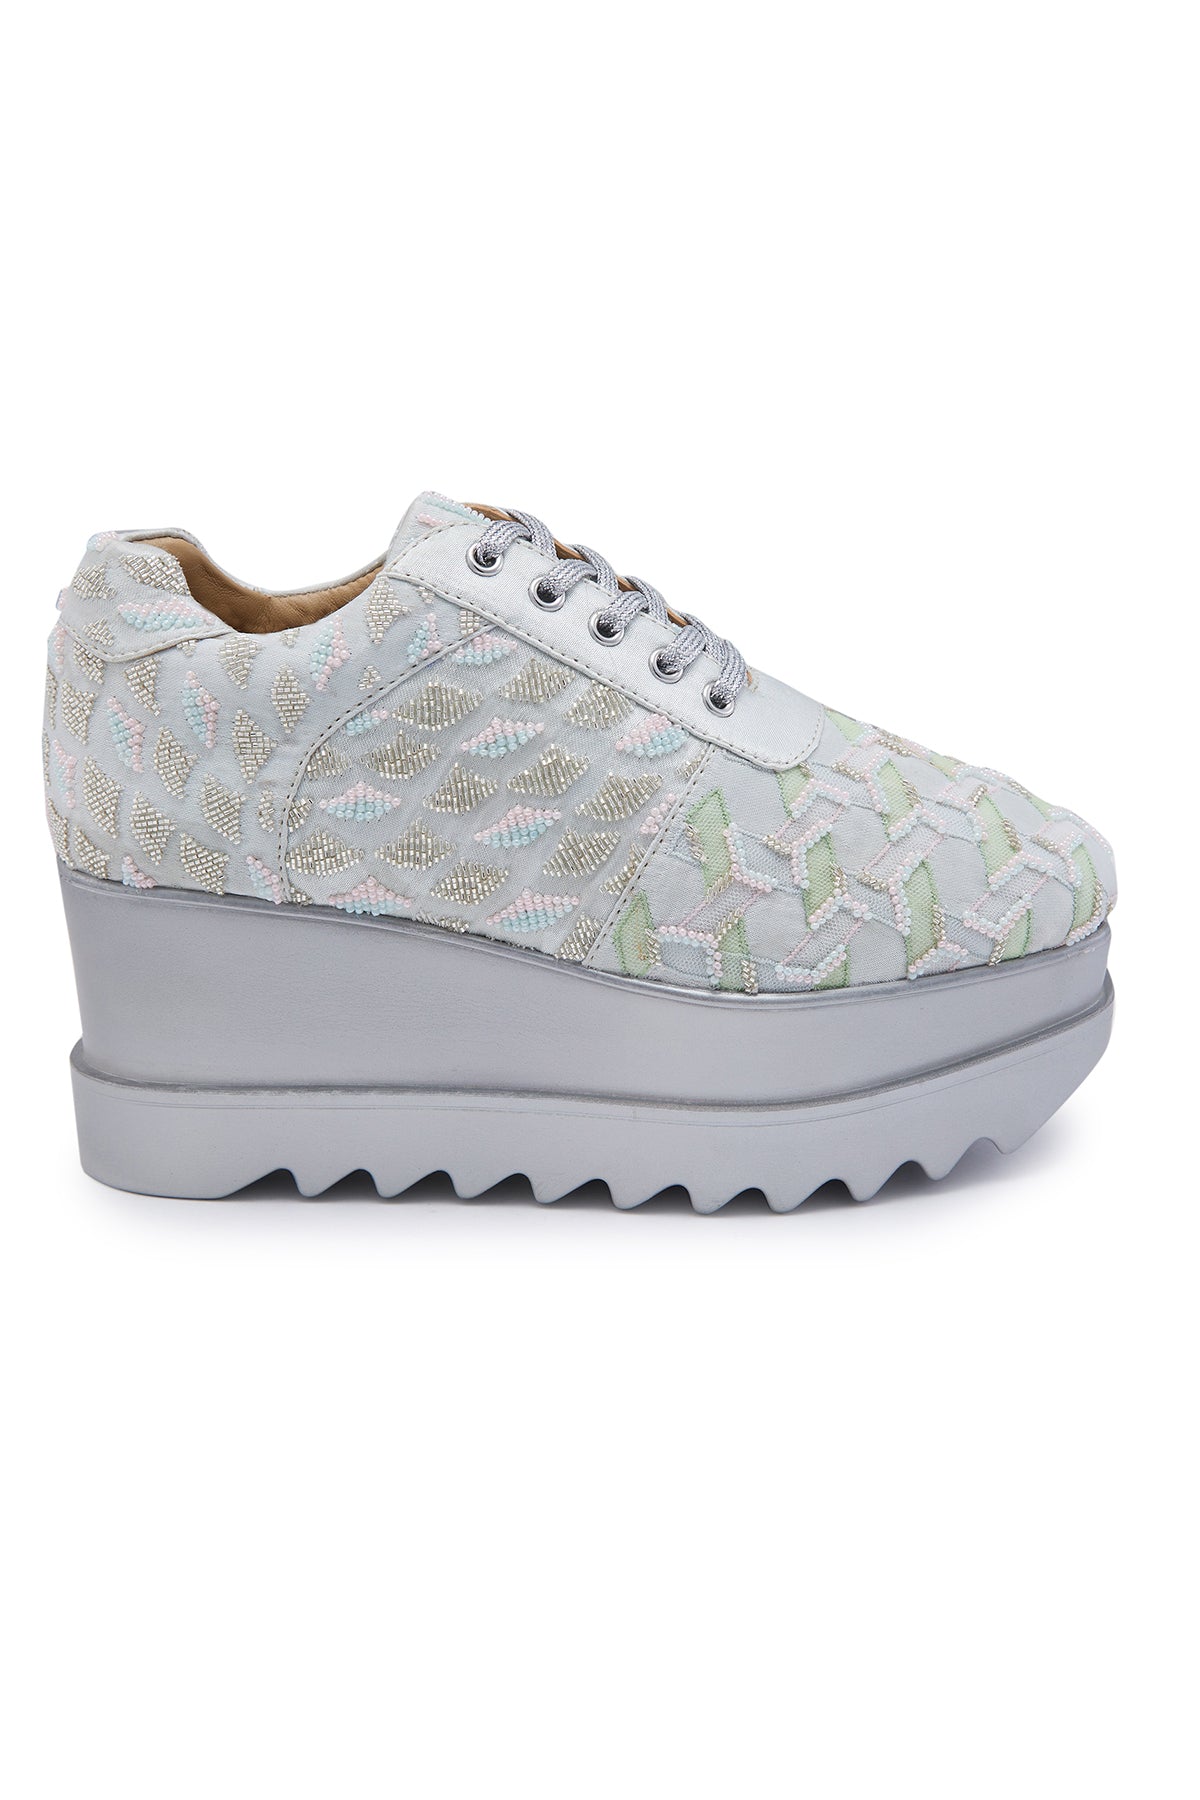 Notting Hill Wedge Sneakers